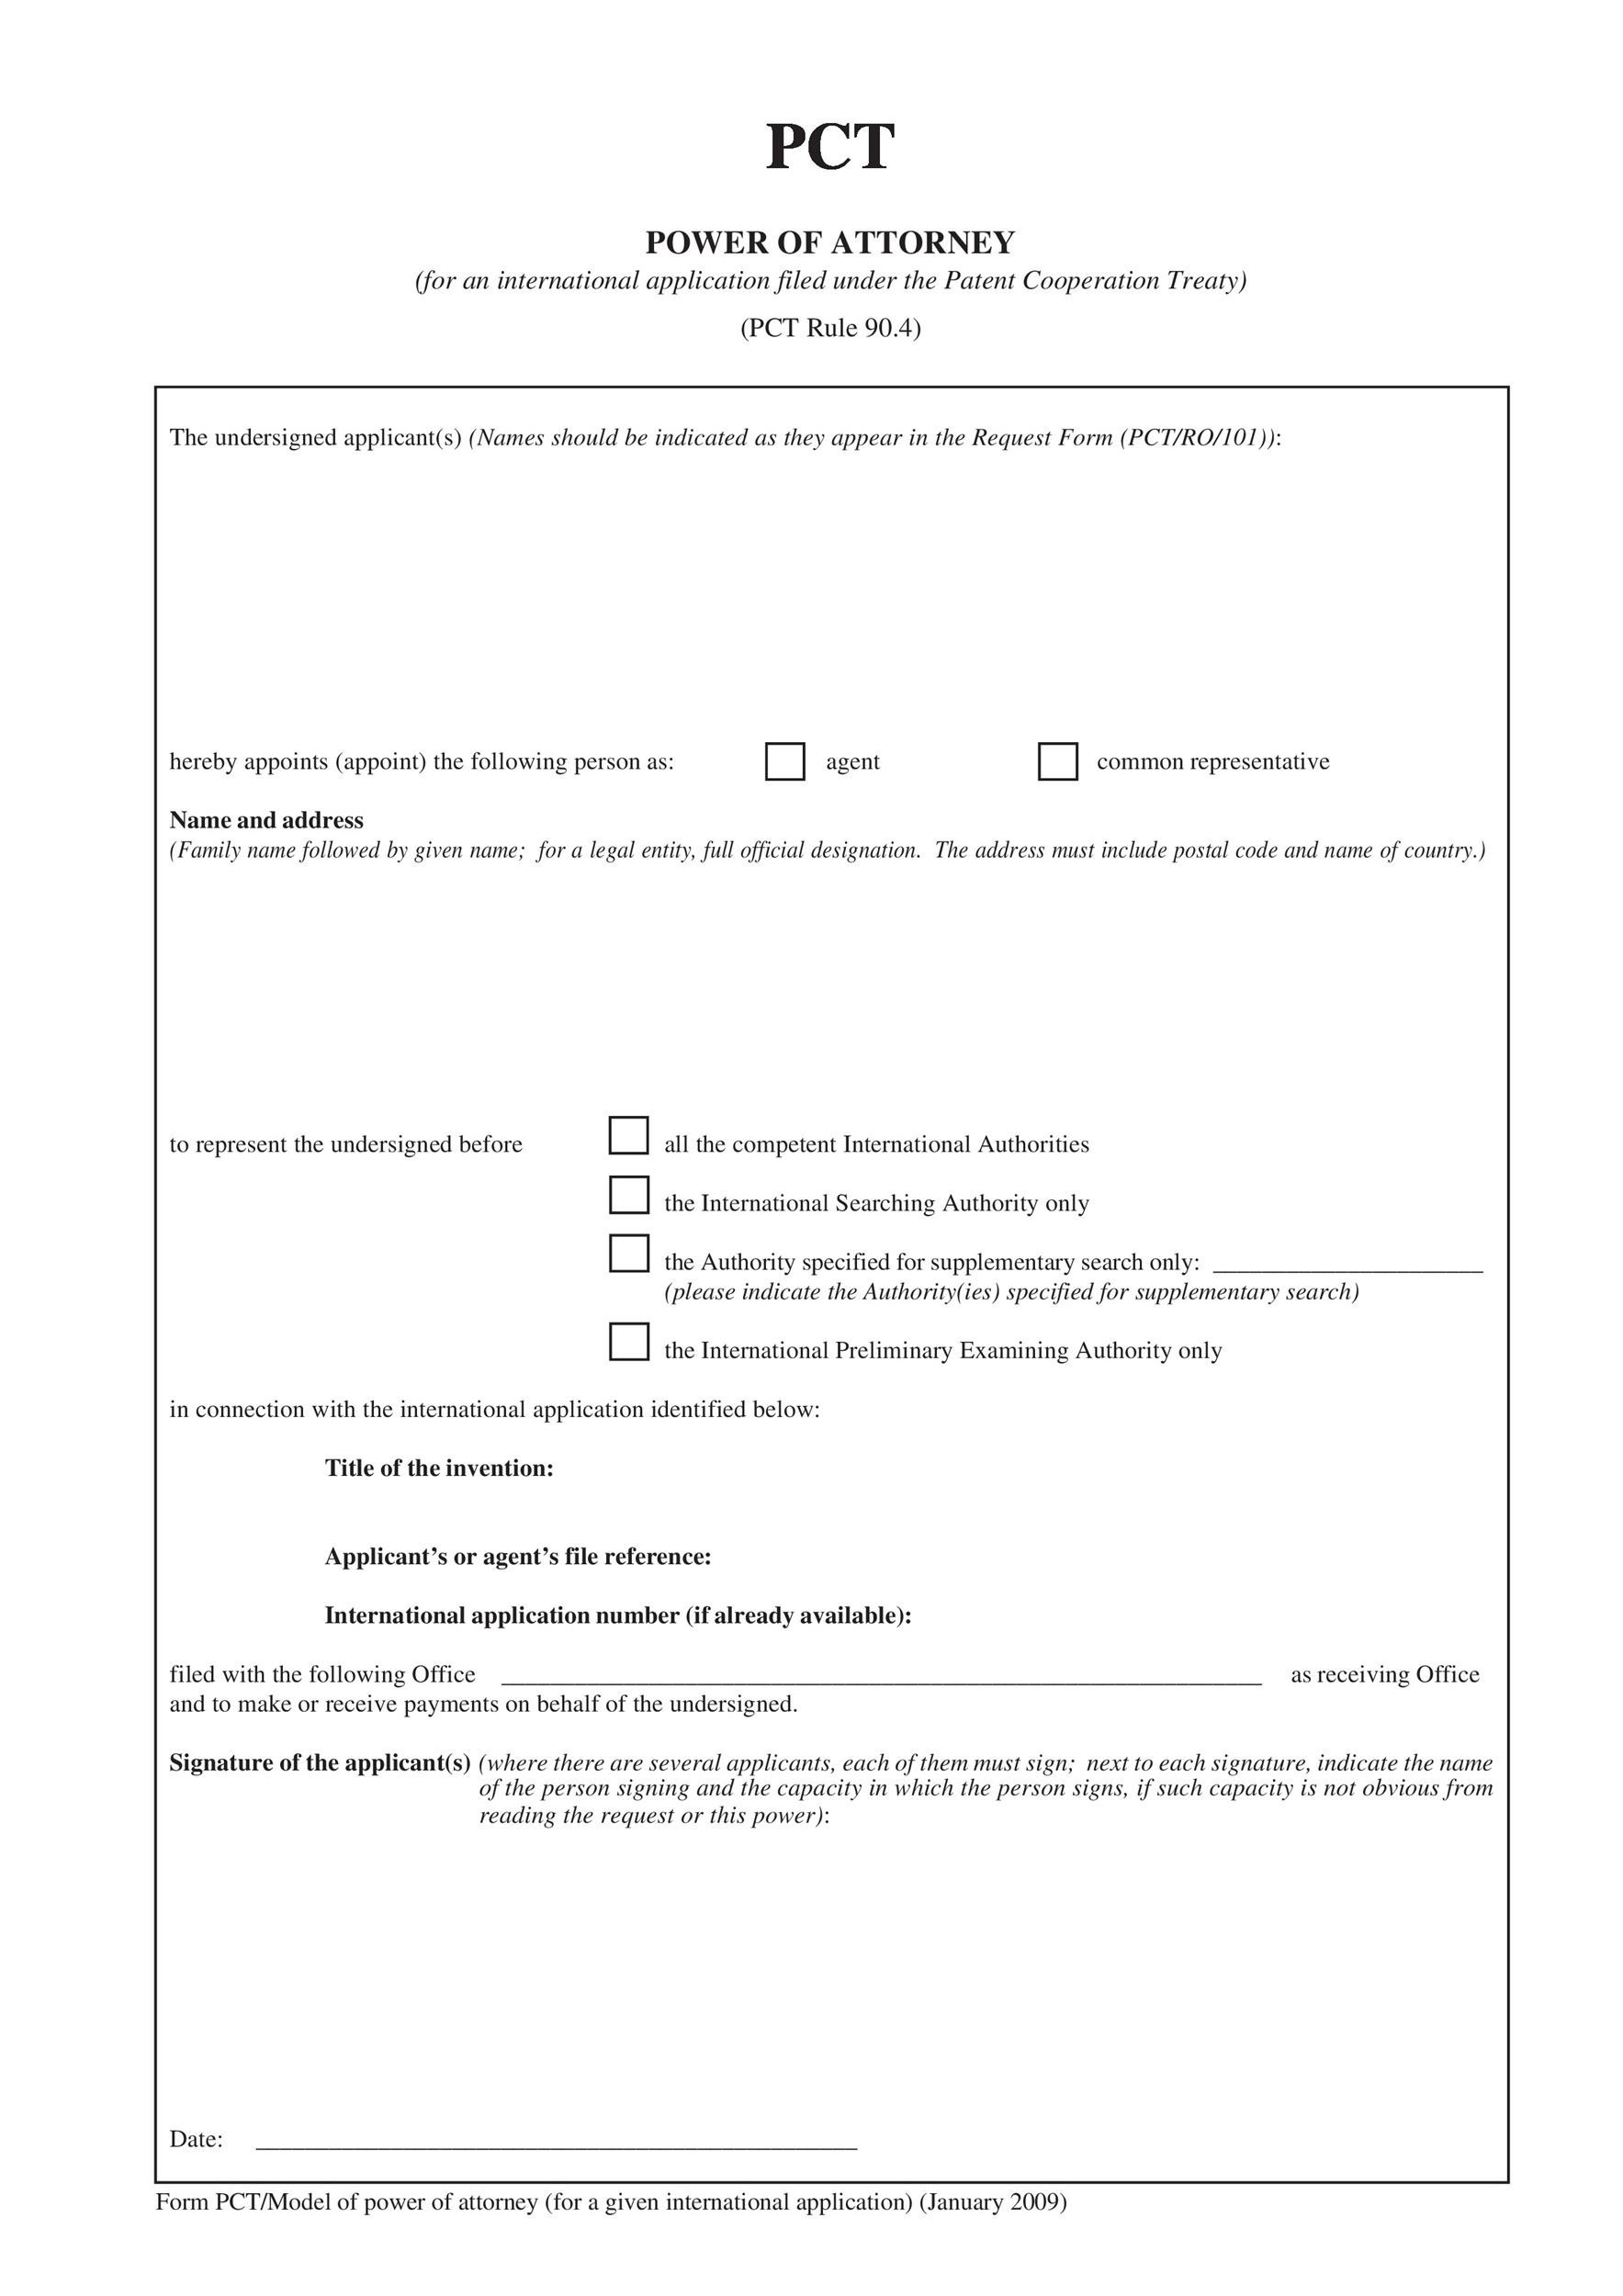 50 Free Power Of Attorney Forms Templates Durable Medical General